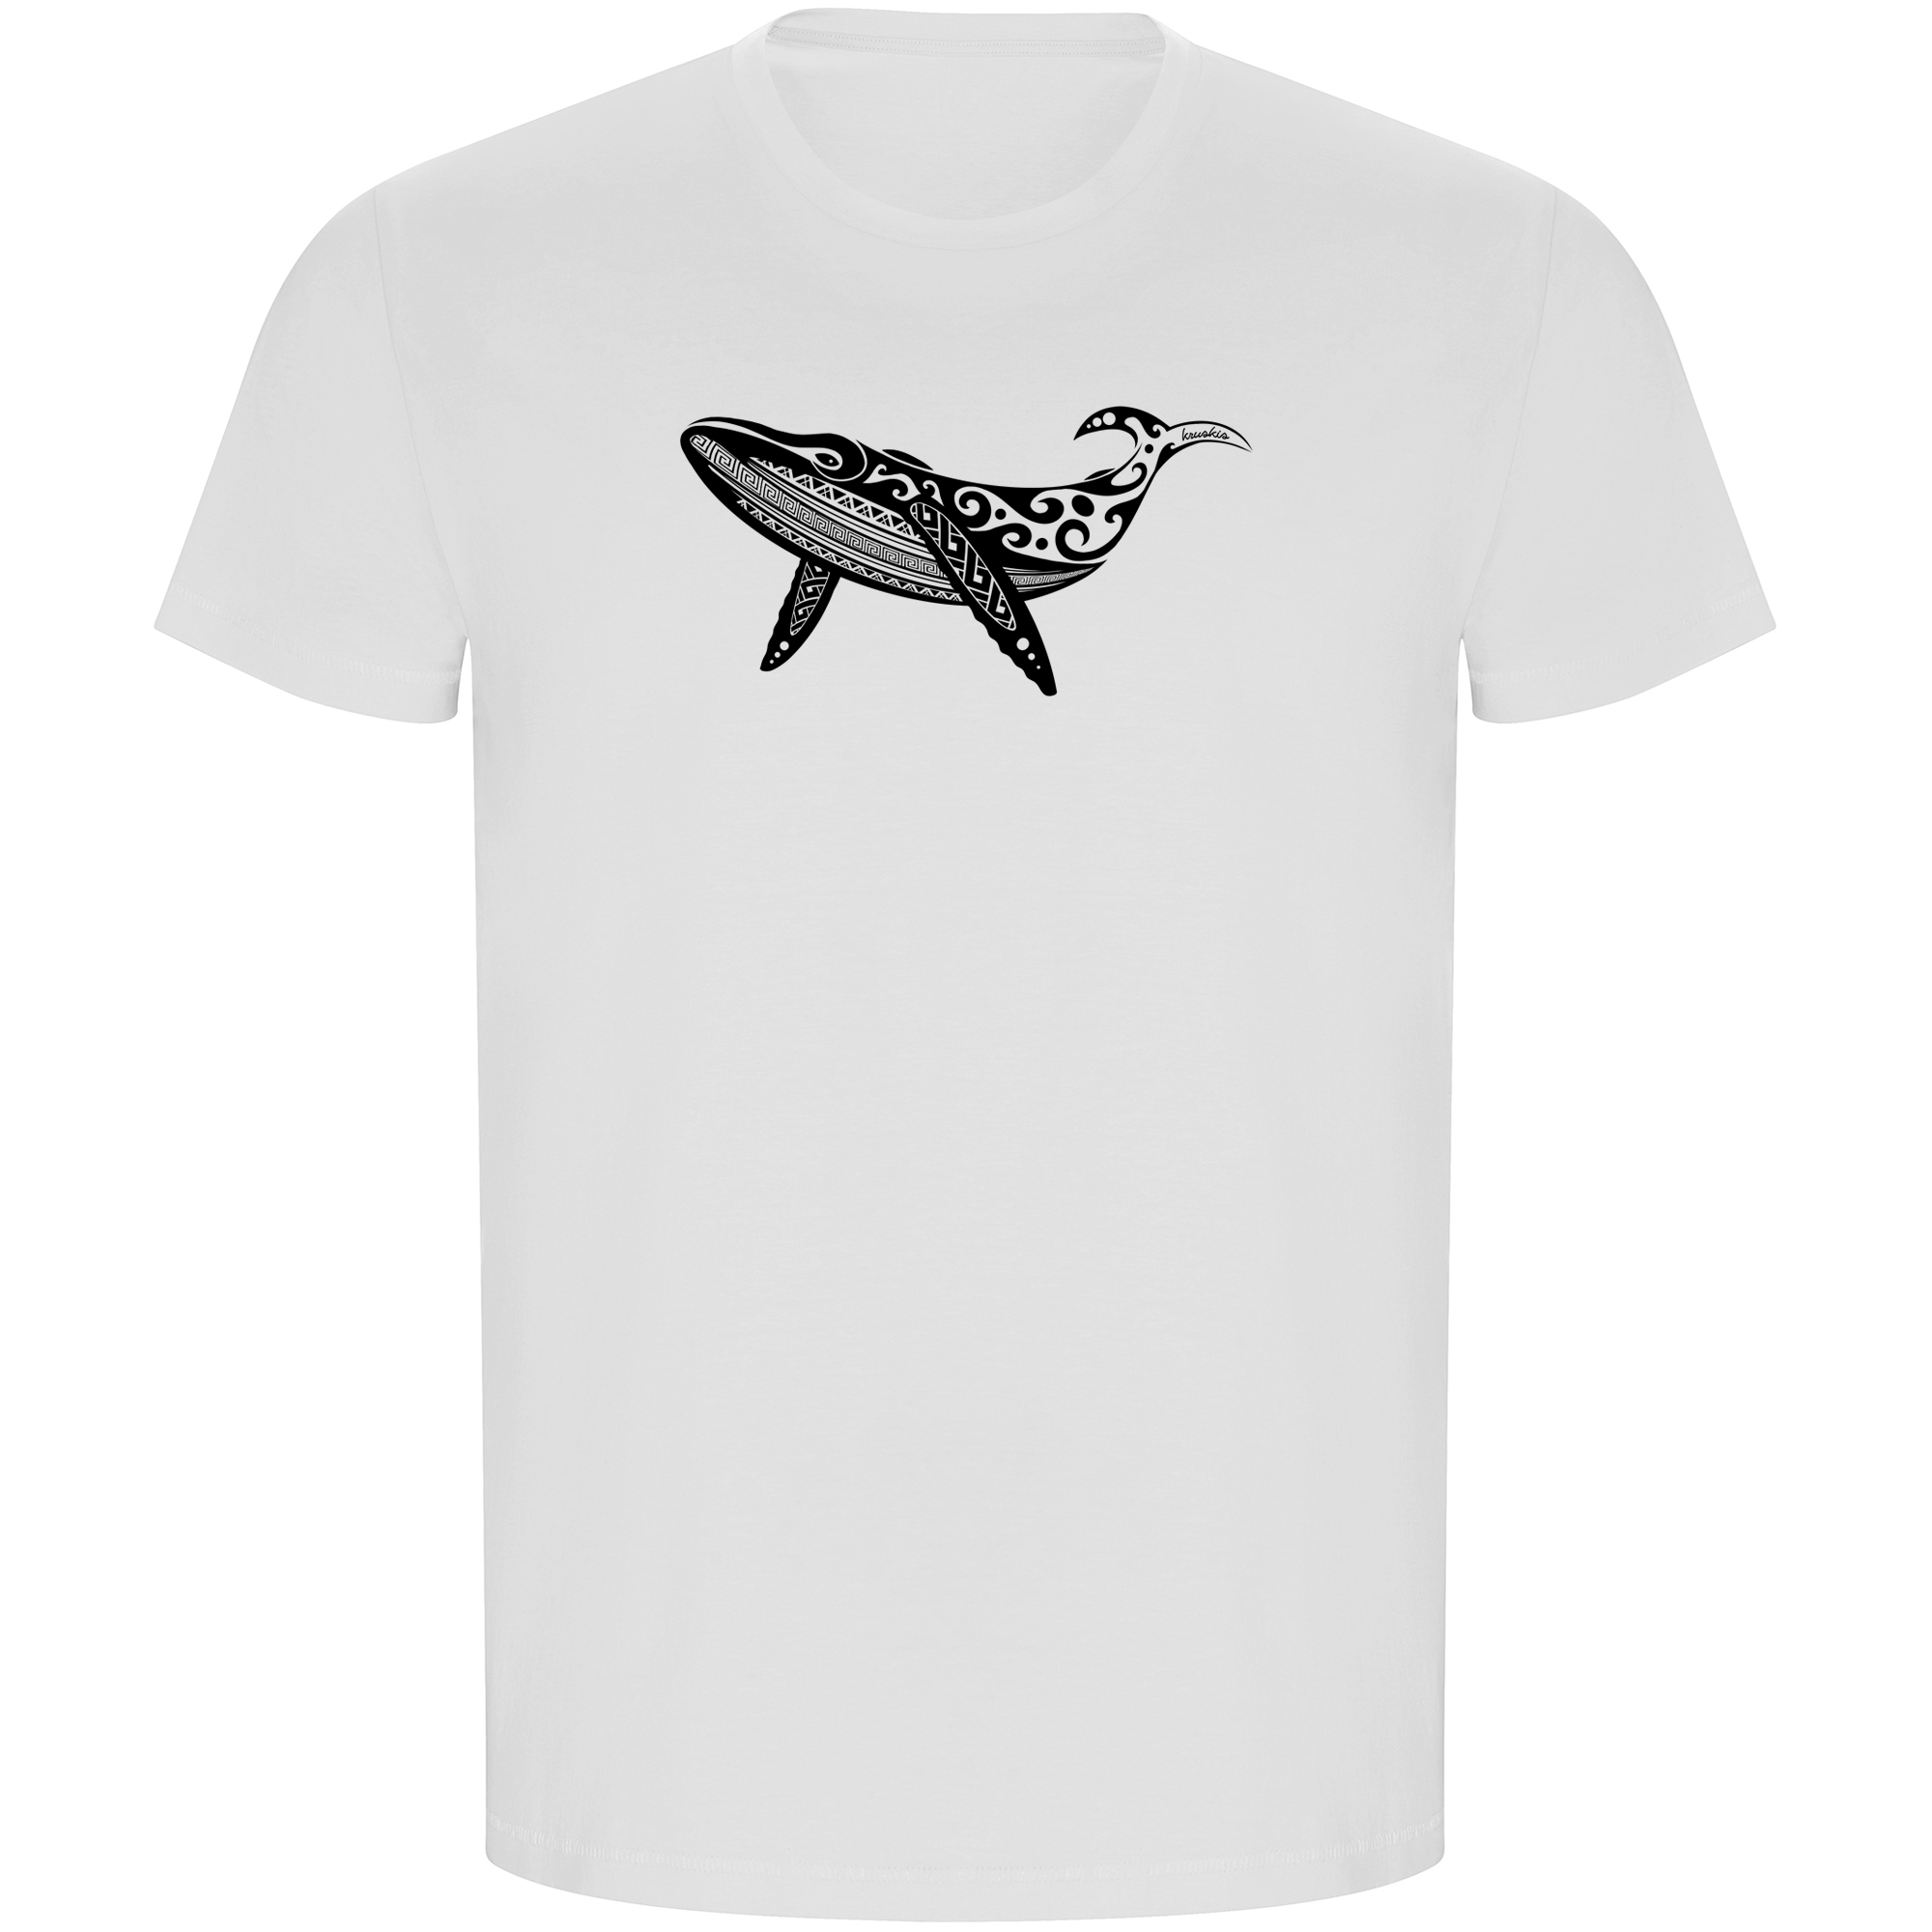 T Shirt ECO Diving Whale Tribal Short Sleeves Man